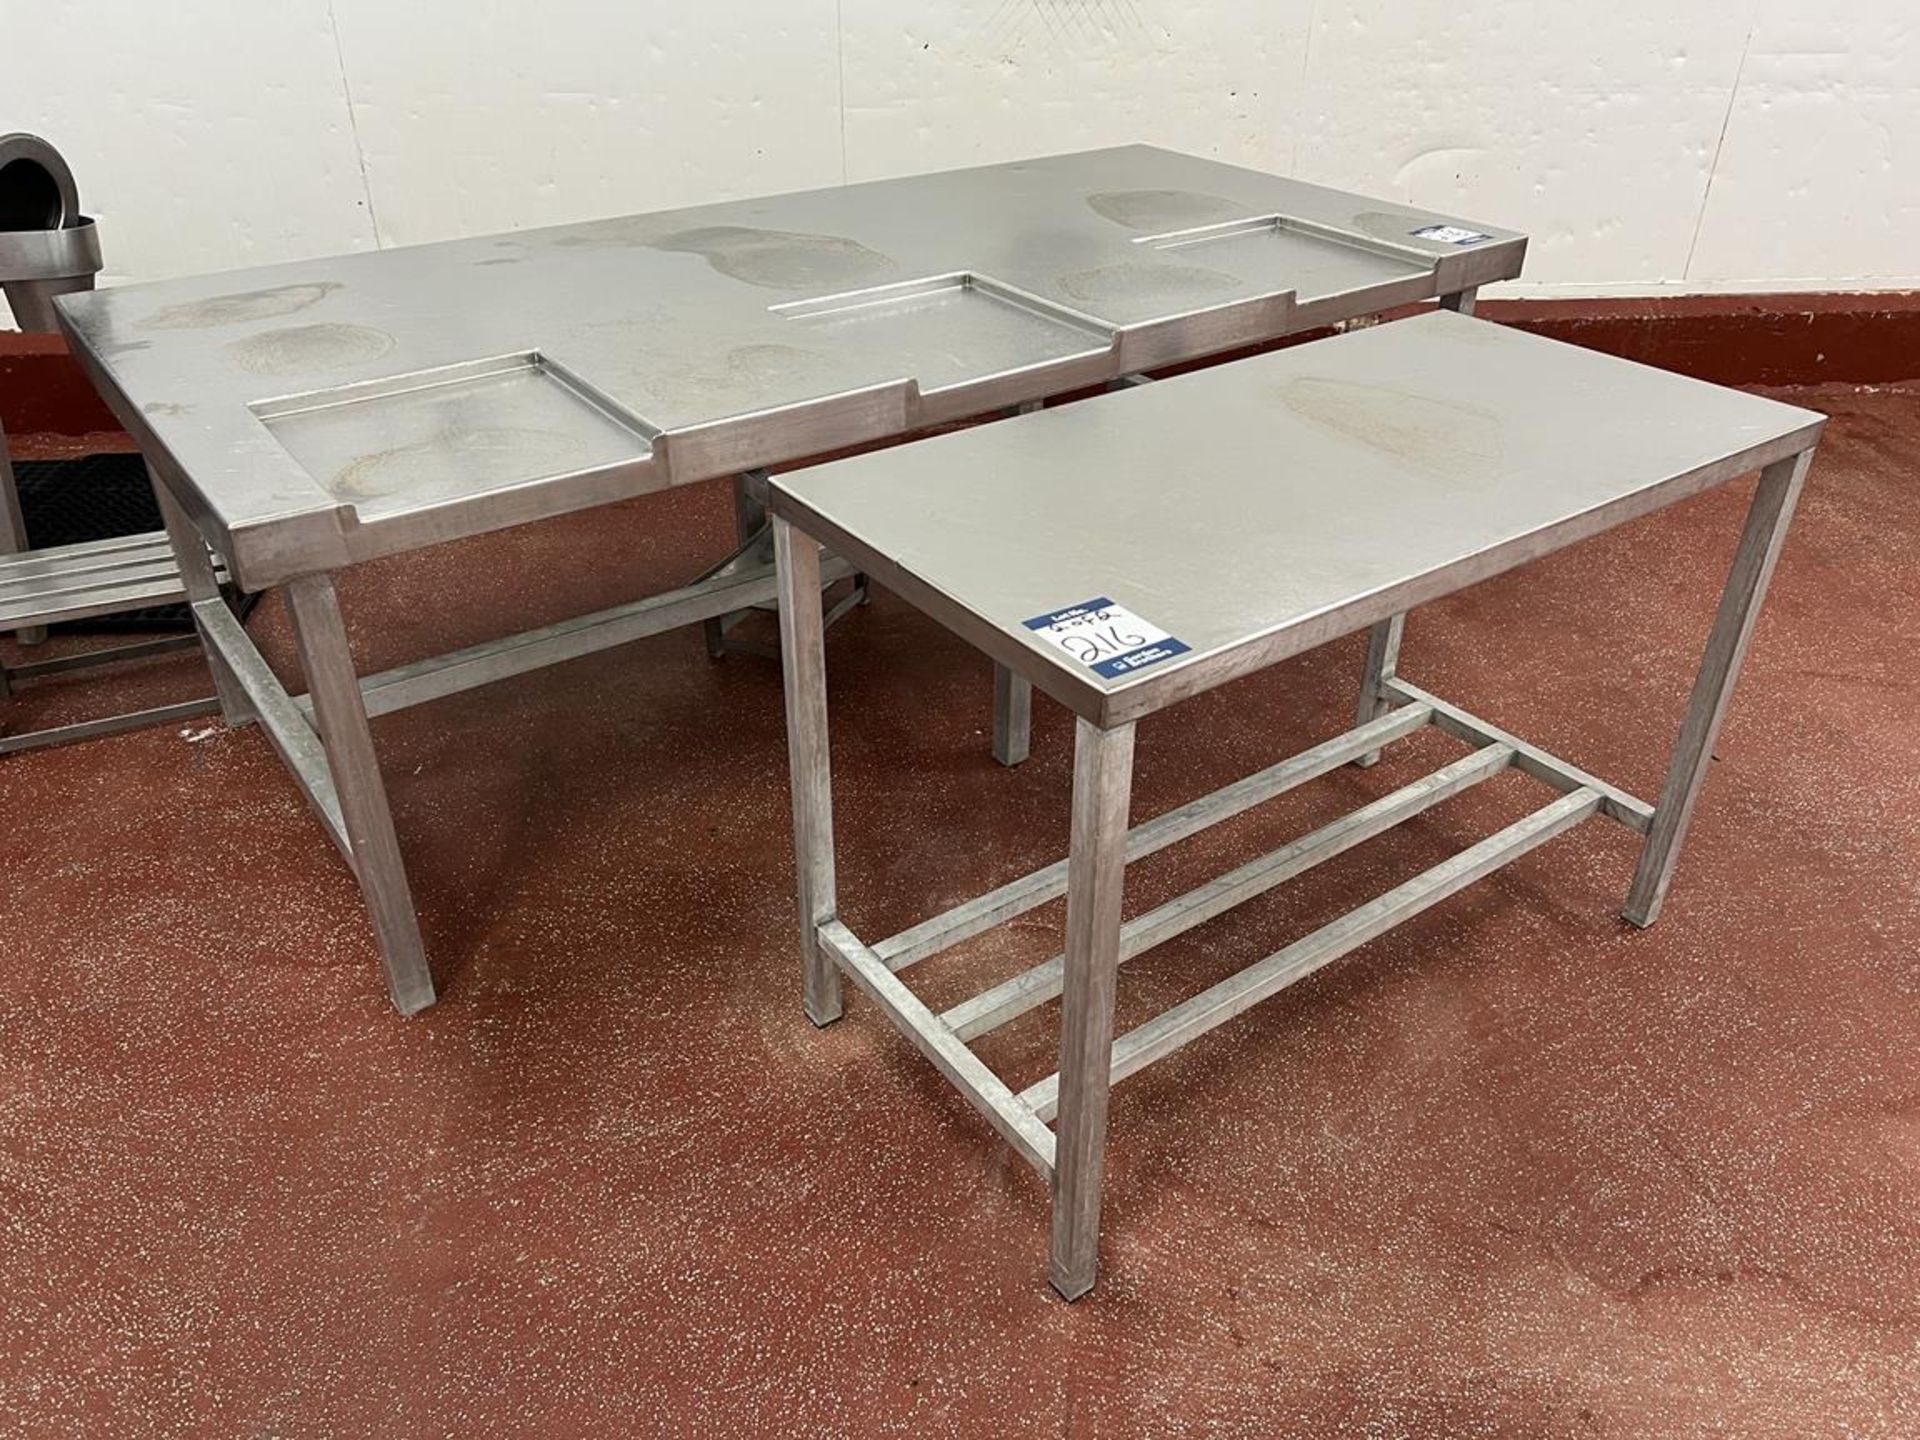 2x (no.) stainless steel preparation tables, 2360 x 1100 and 1200 x 600mm